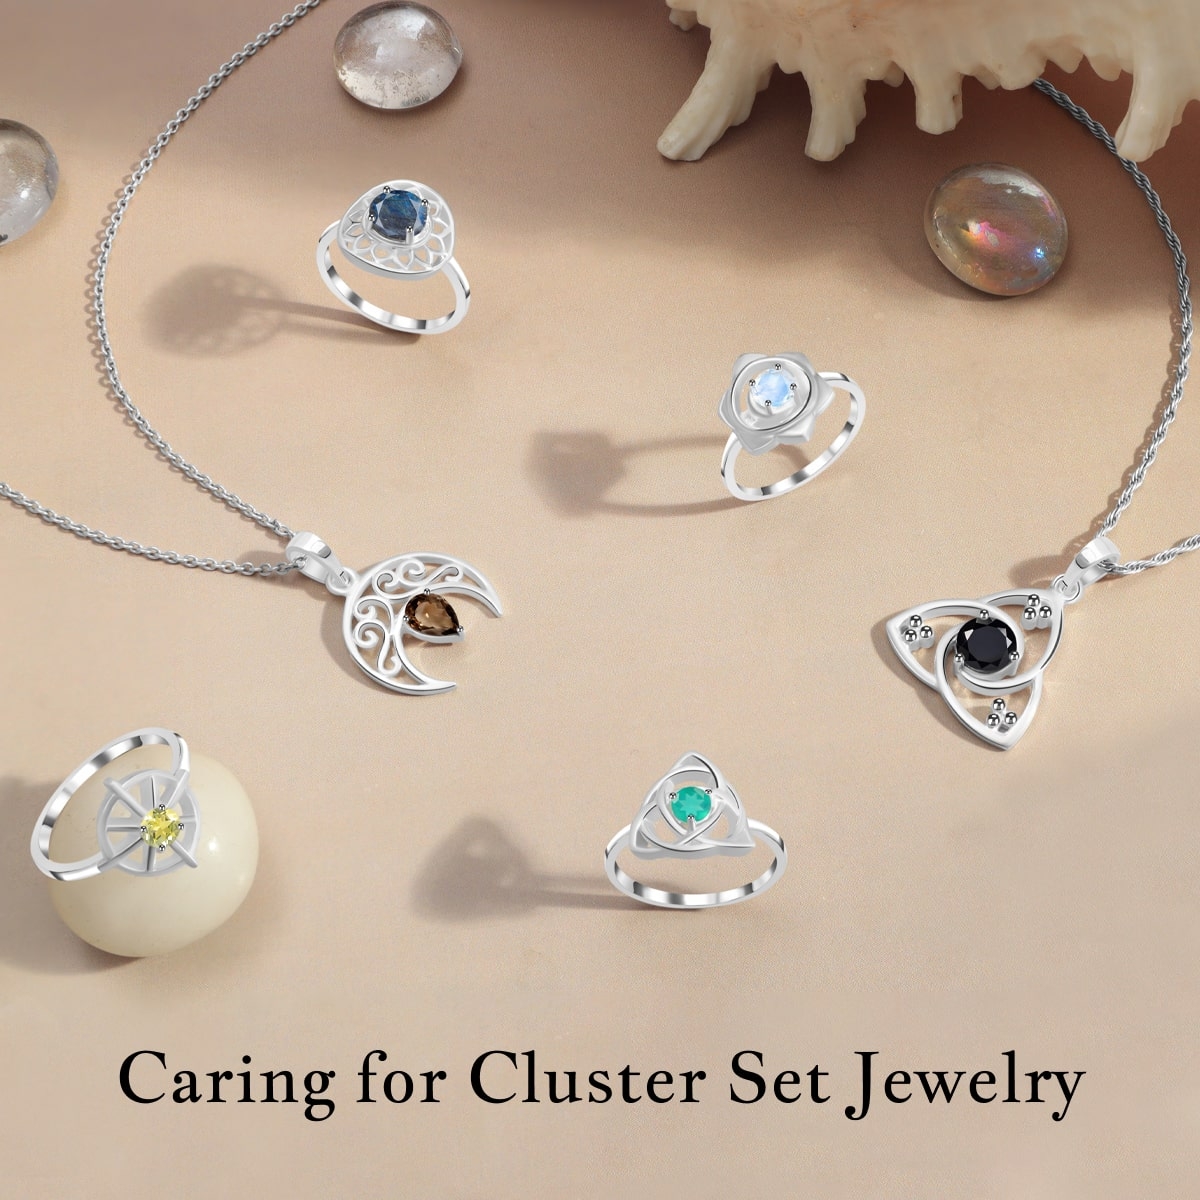 How to Care for Jewelry with Cluster Setting